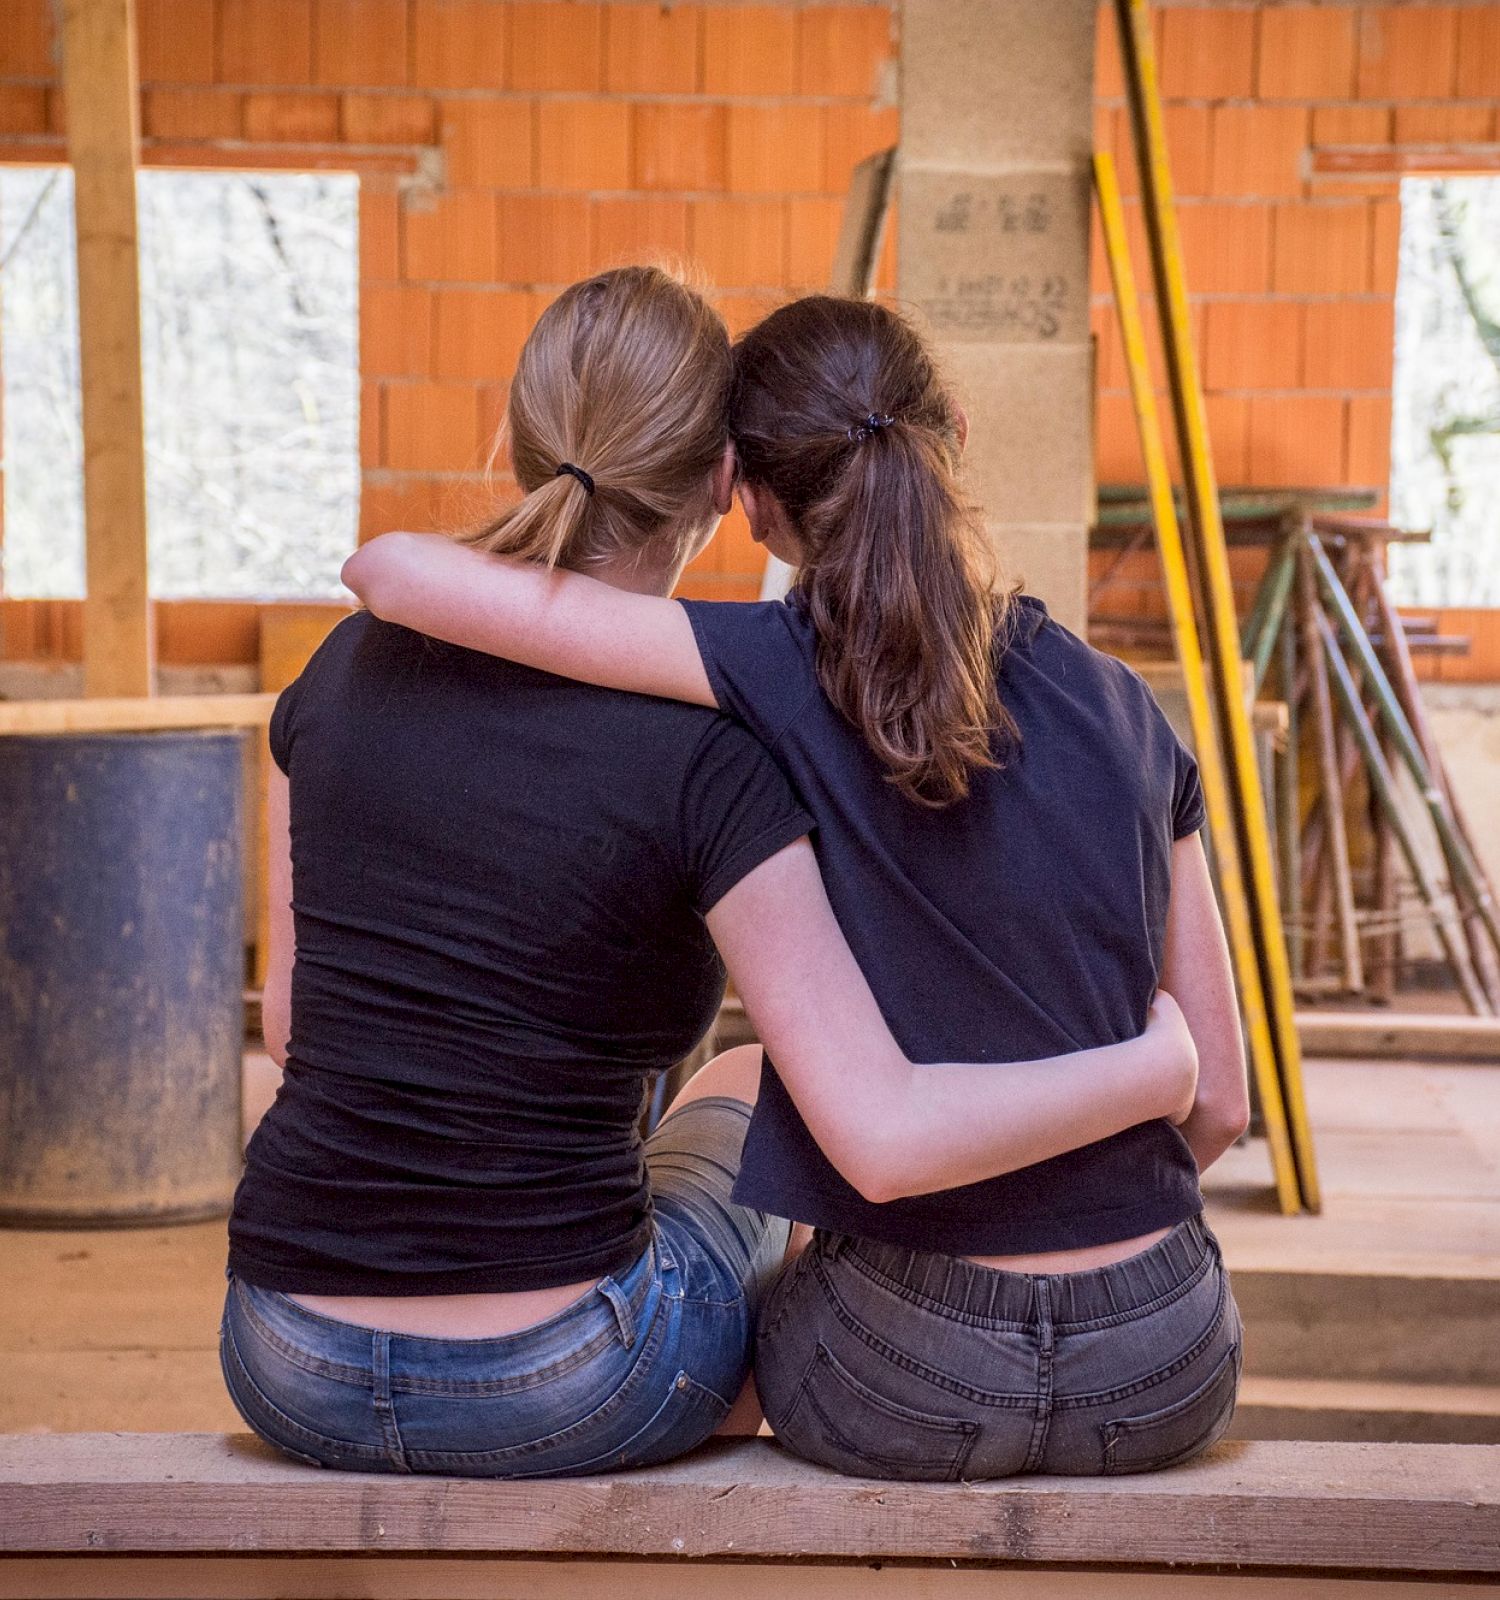 Two people with their arms around each other, sitting on a wooden plank in a construction site with unfinished walls and building materials.